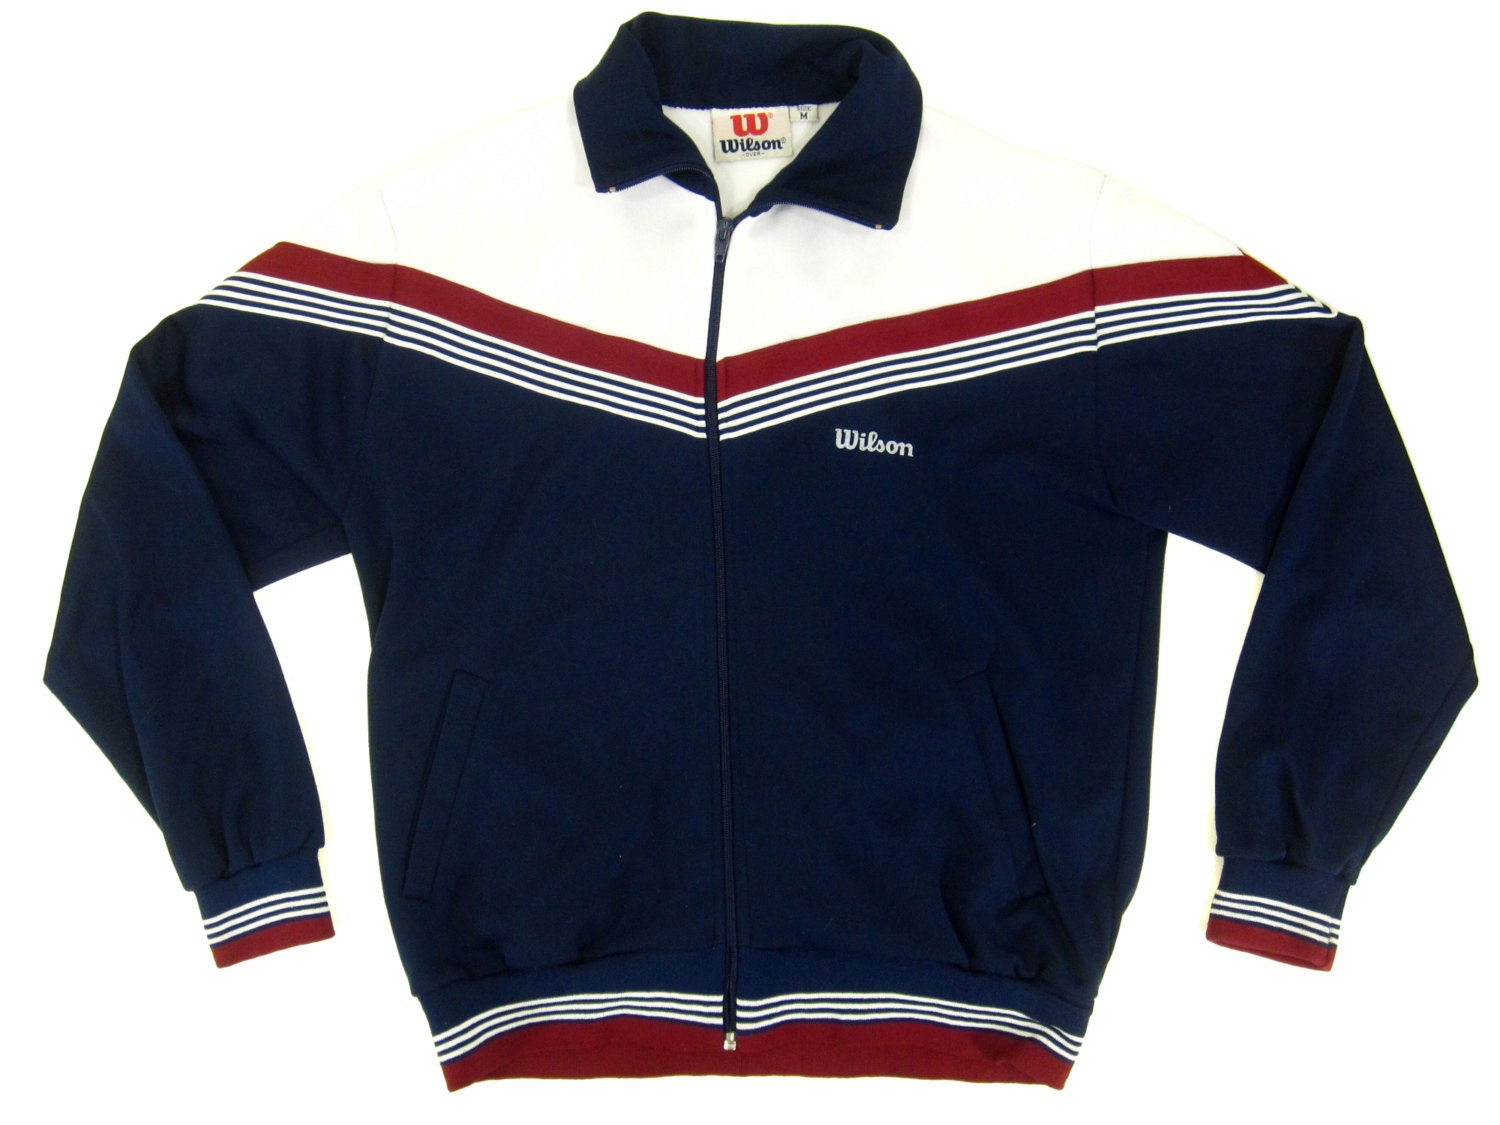 Vintage 1980s Track Jacket Red White and Blue by ApparelVintage